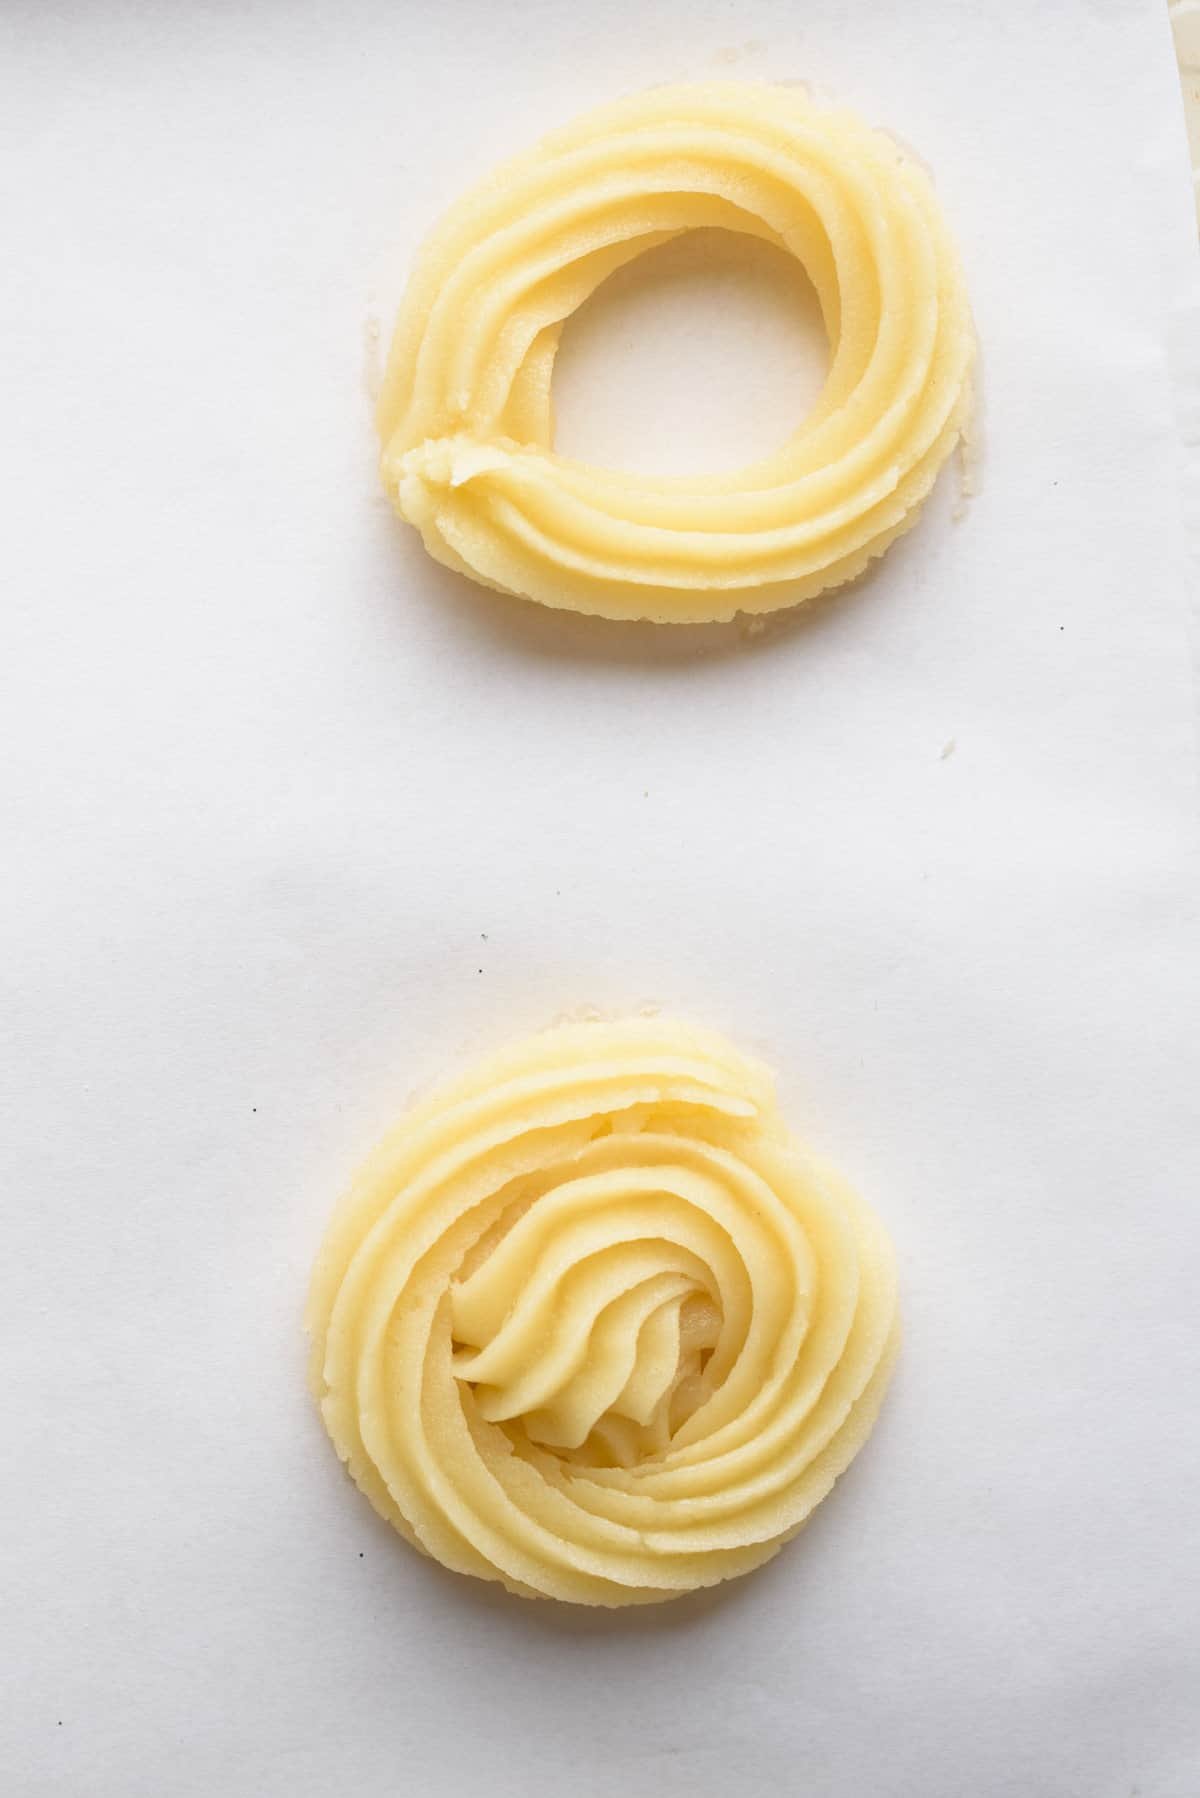 Overhead view showing two step process to pipe the outer ring (above) and inner ring (below). Before baking.,